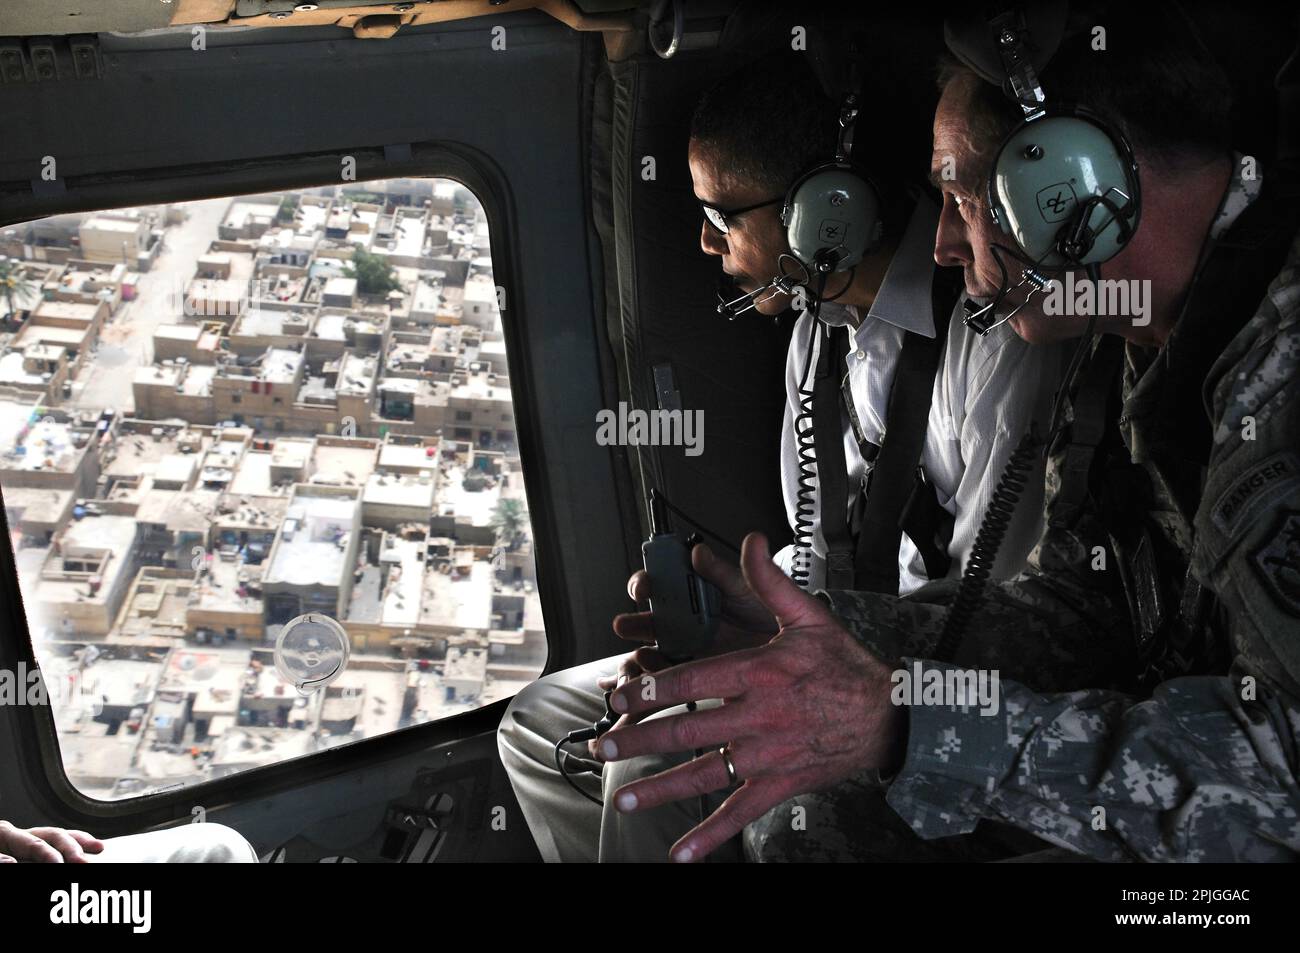 U.S. Army Gen. David H. Petraeus, right, commander of Multi-National Force Iraq, discusses security improvements with Sen. Barack Obama, left, during an aerial tour of Baghdad, Iraq, July 21, 2008.DoD Photo by SSG Lorie Jewell Stock Photo